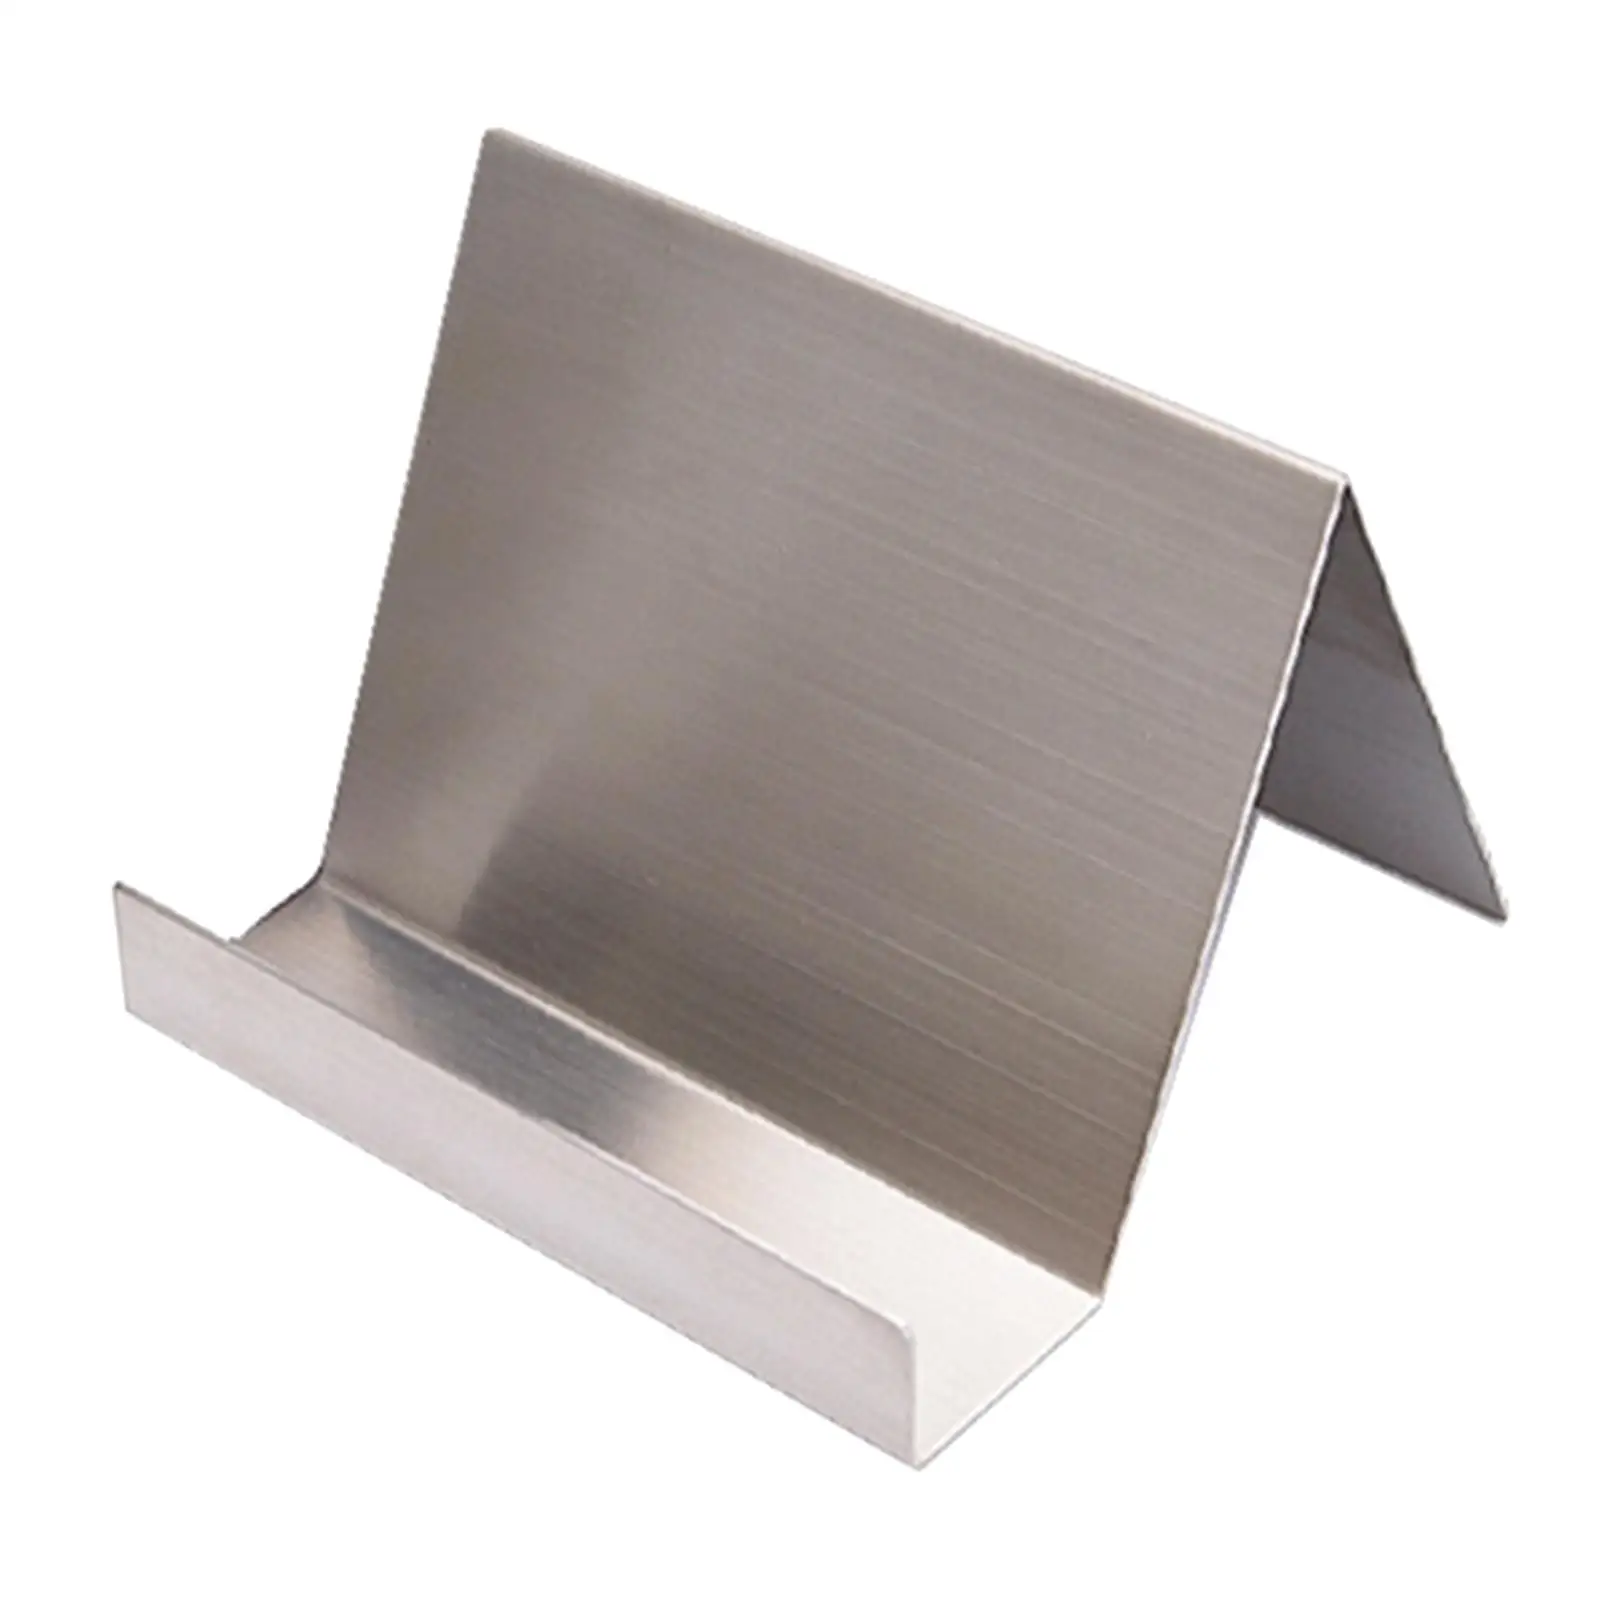 Stainless Steel Bag Display Stand Clear Acrylic Shelf Handbag Display Stand for Countertop